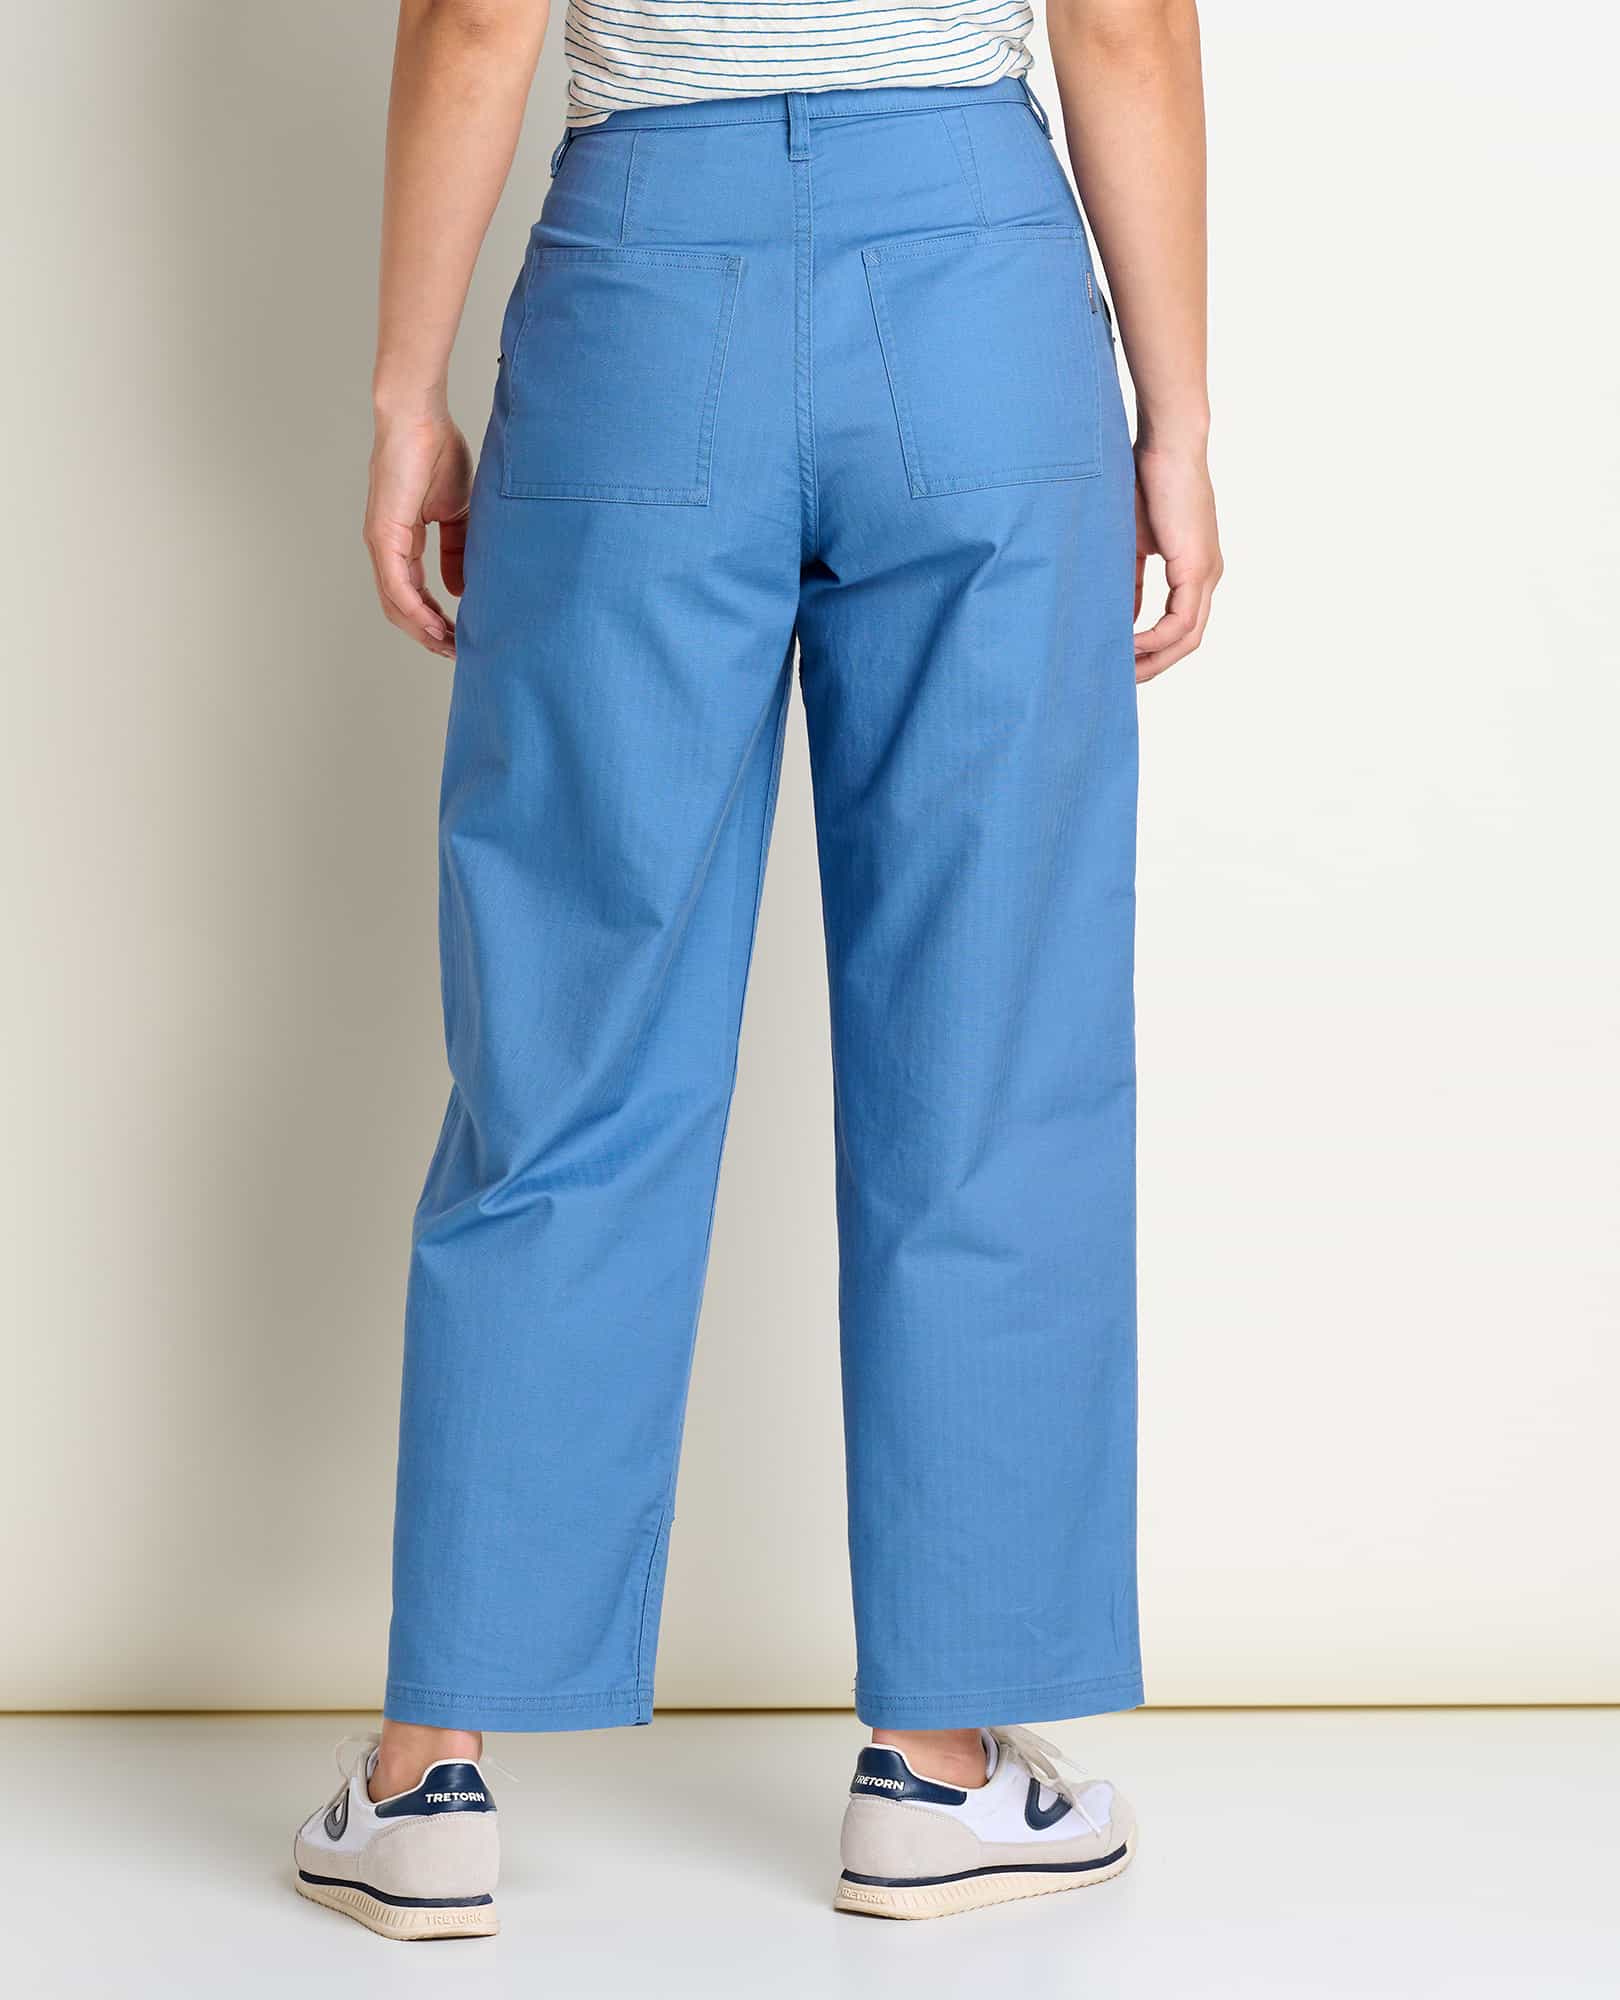 Women's High-Rise Modern Ankle Jogger Pants - A New Day™ Teal XL